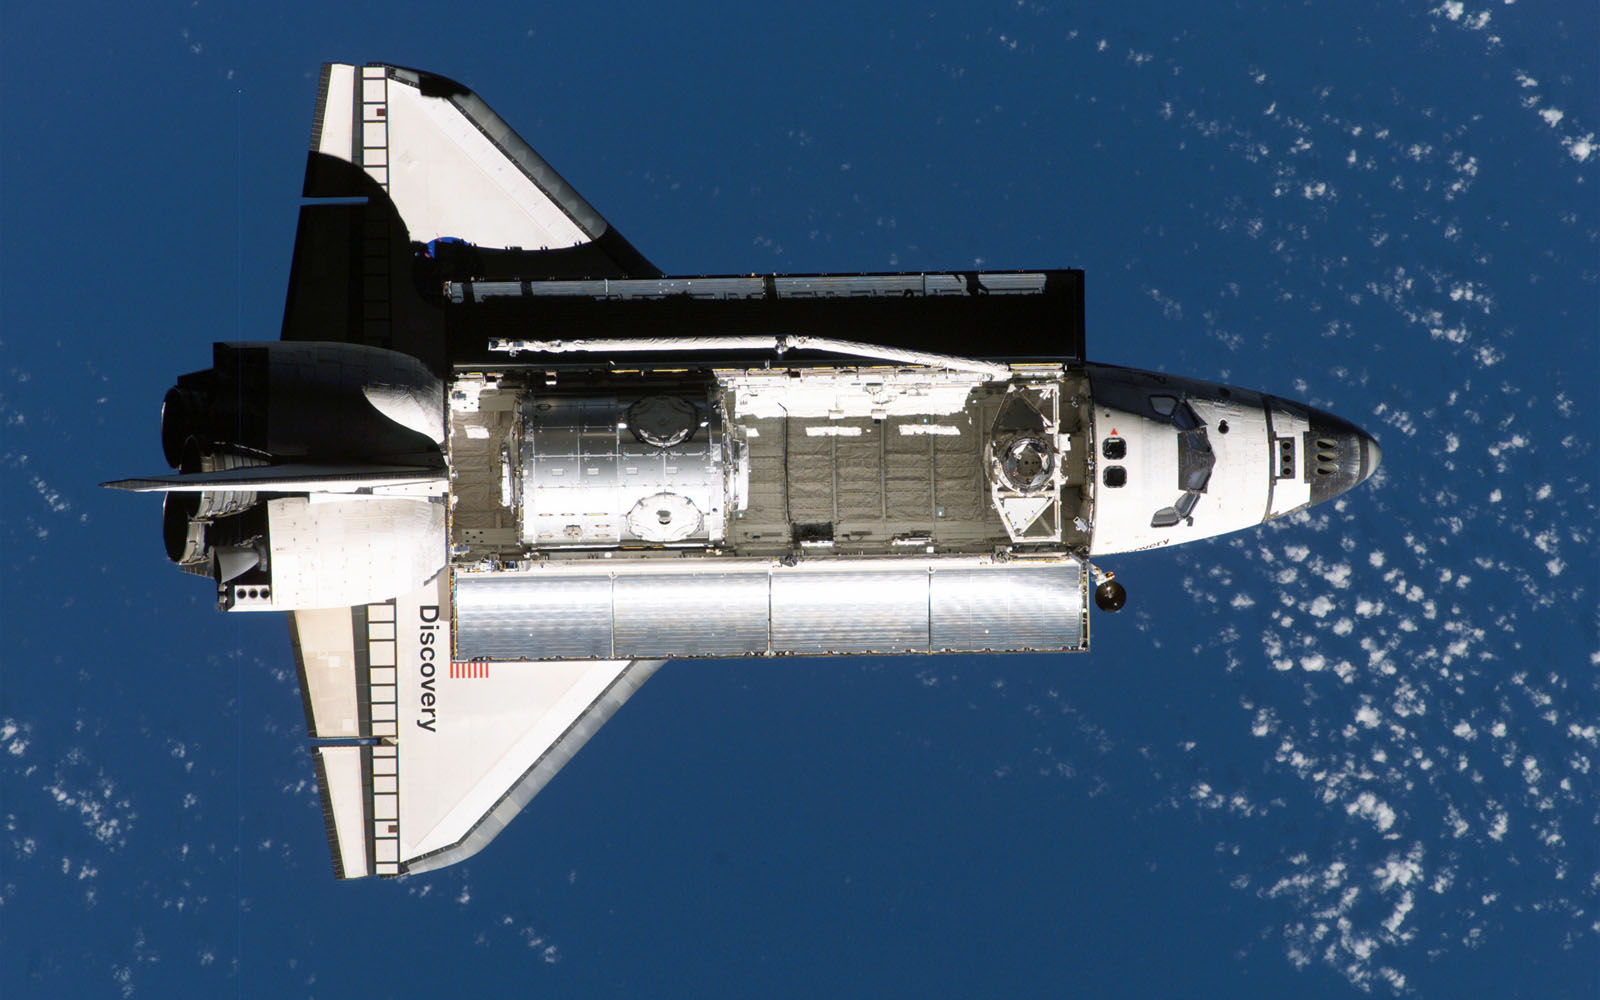 Tag Discovery Space Shuttle Photos Image Wallpaper And Pictures